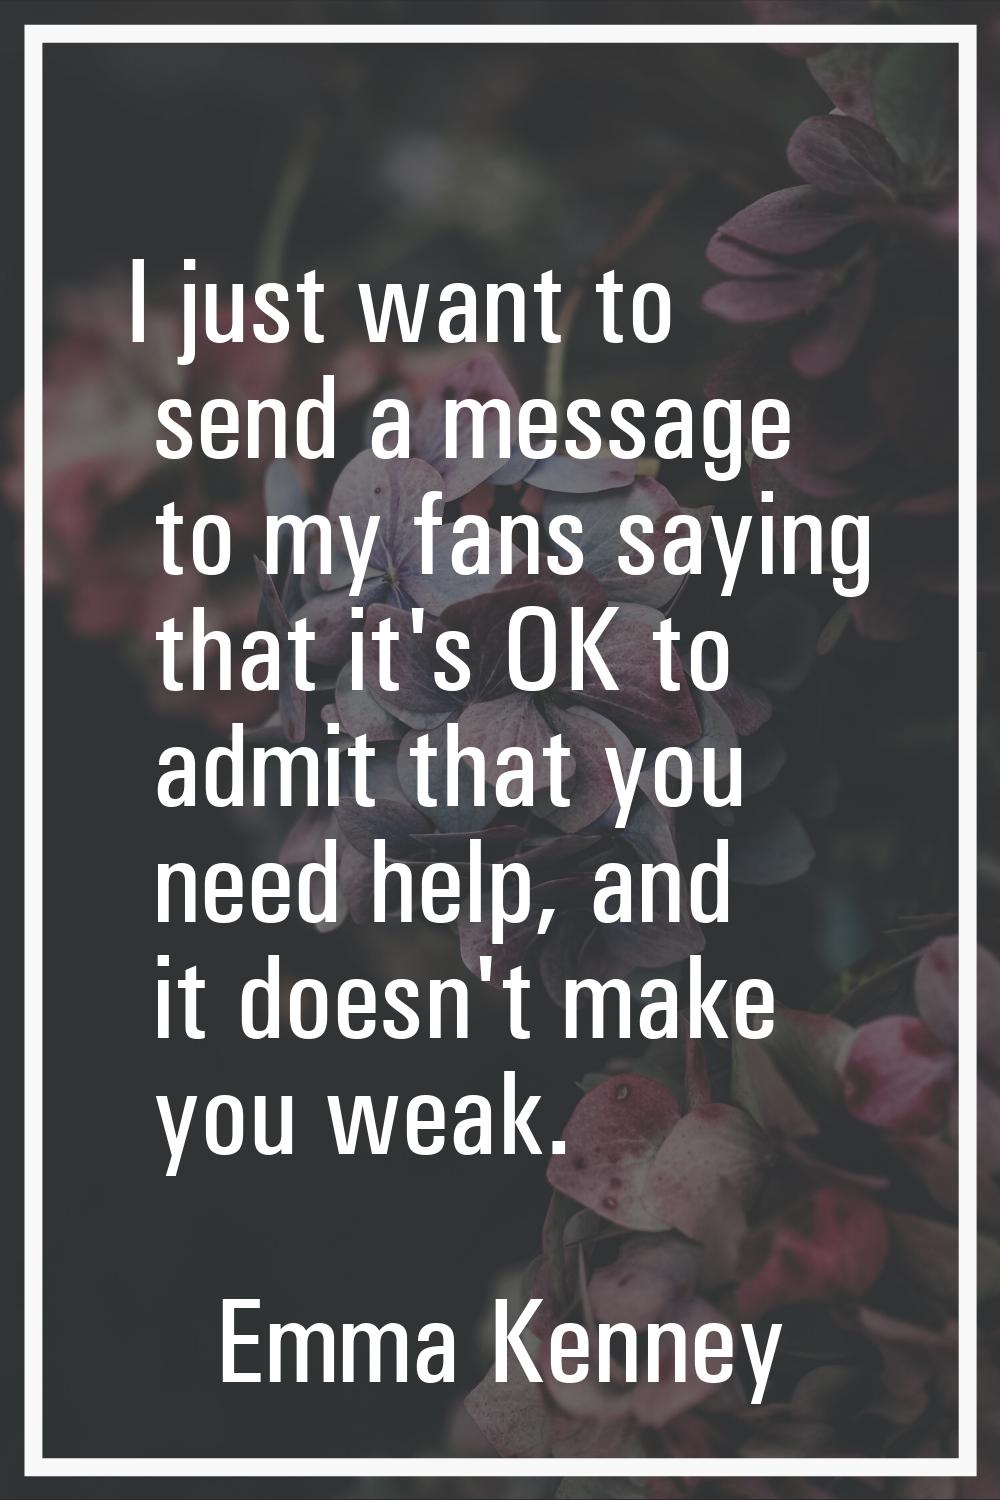 I just want to send a message to my fans saying that it's OK to admit that you need help, and it do